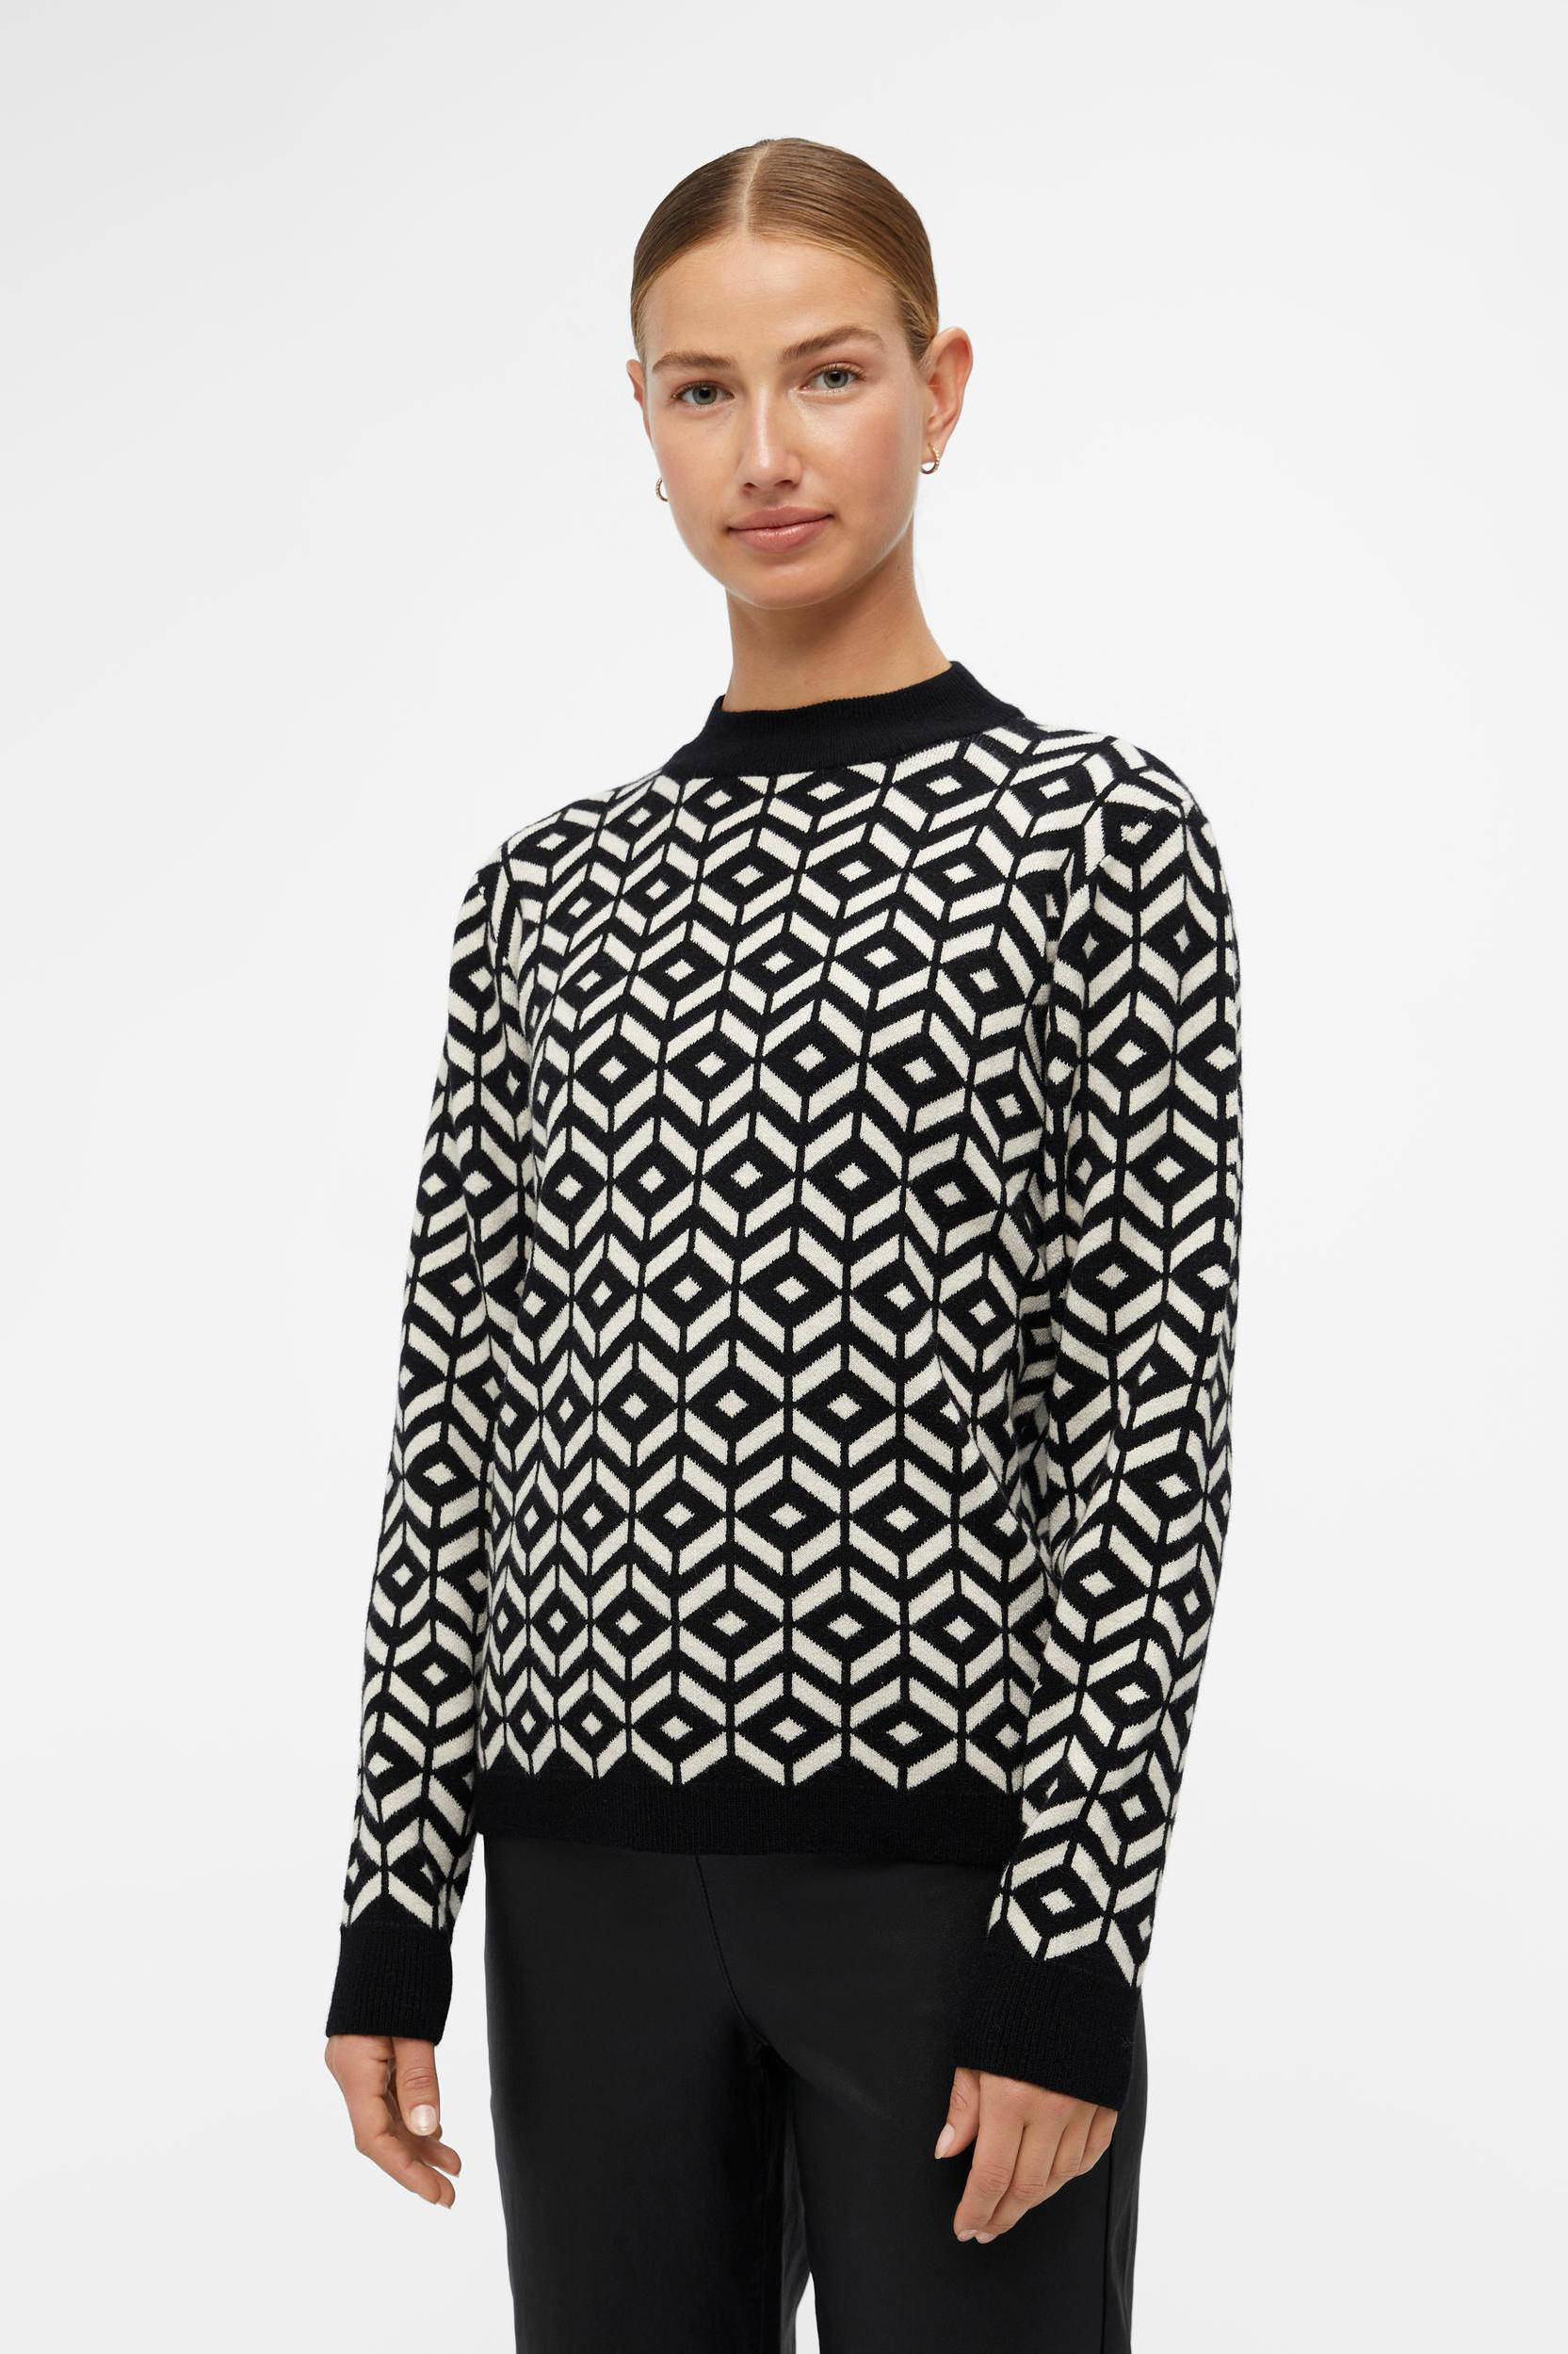 Mode Sweaters Poncho’s Airfield Poncho zwart-lichtgrijs volledige print casual uitstraling 